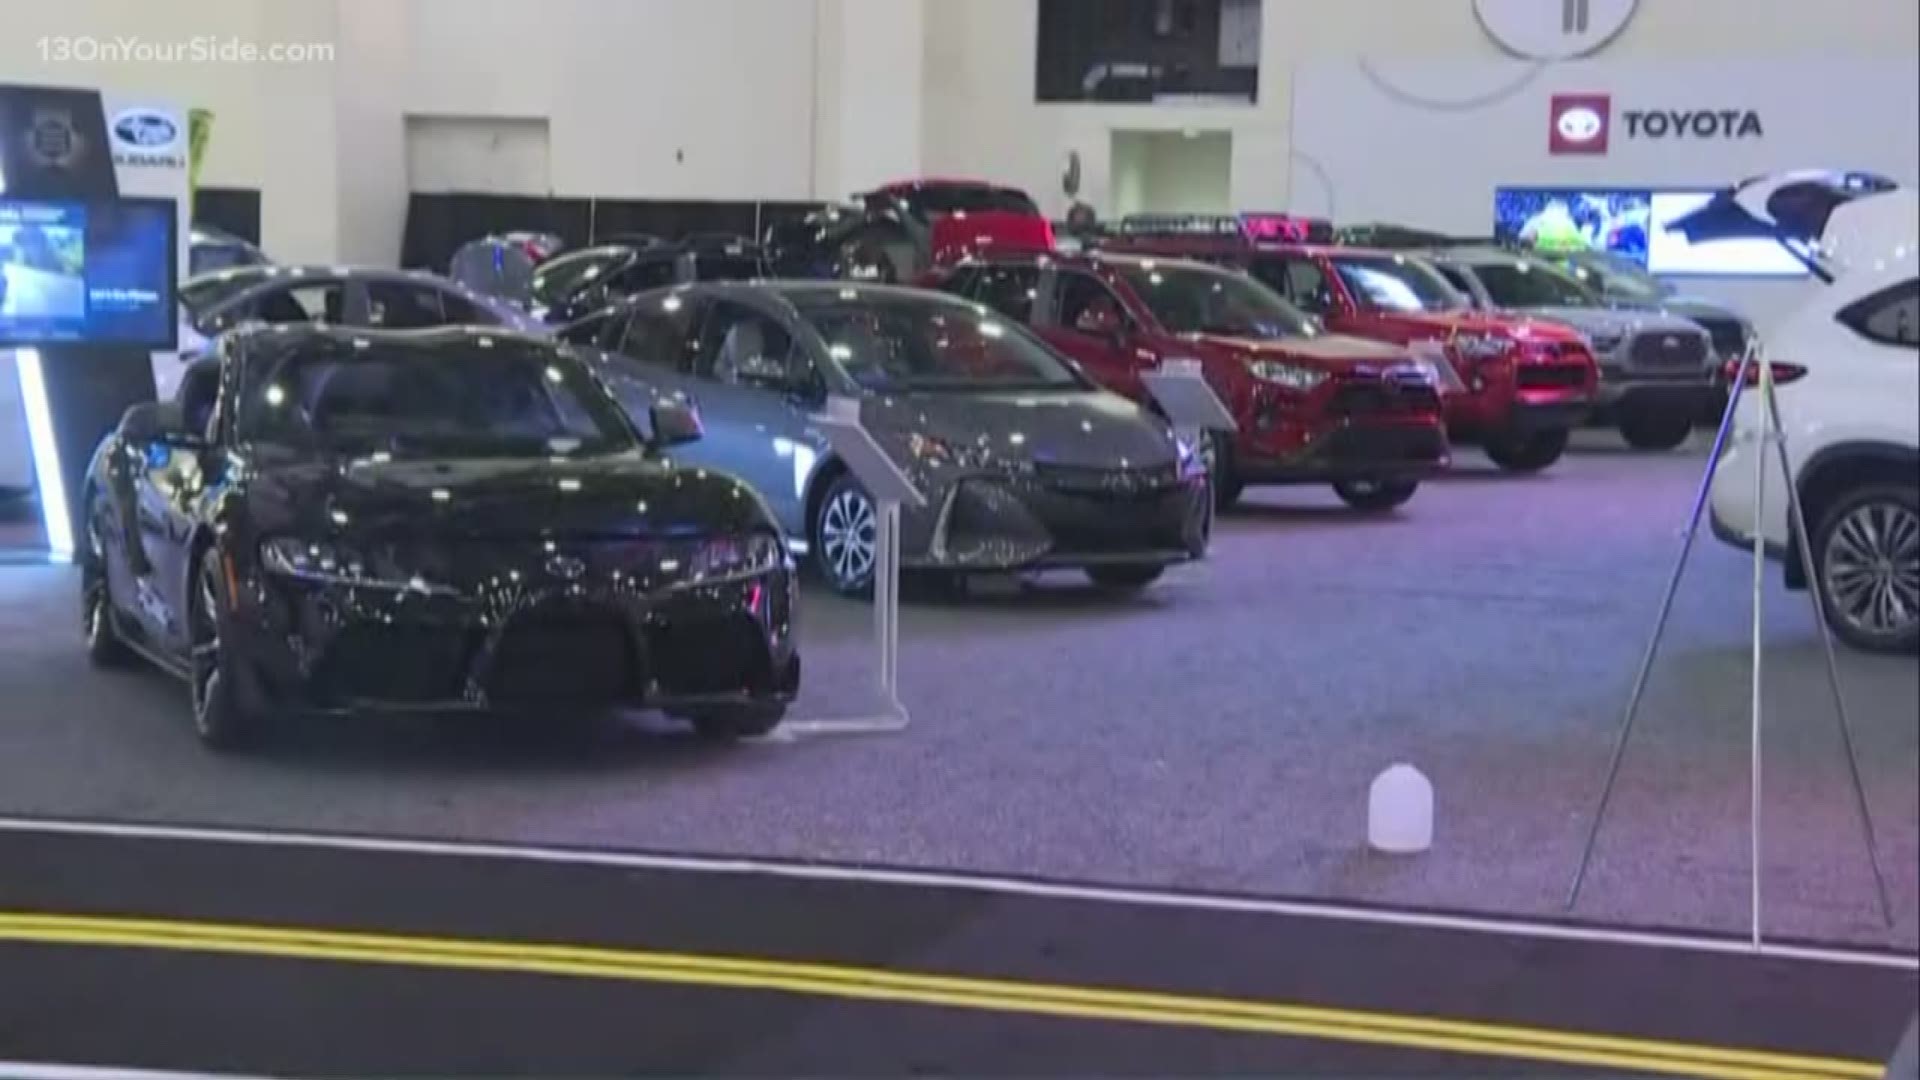 13 ON YOUR SIDE's Angela Cunningham was live at the Michigan International Auto Show with a look at the hottest vehicle of 2020.